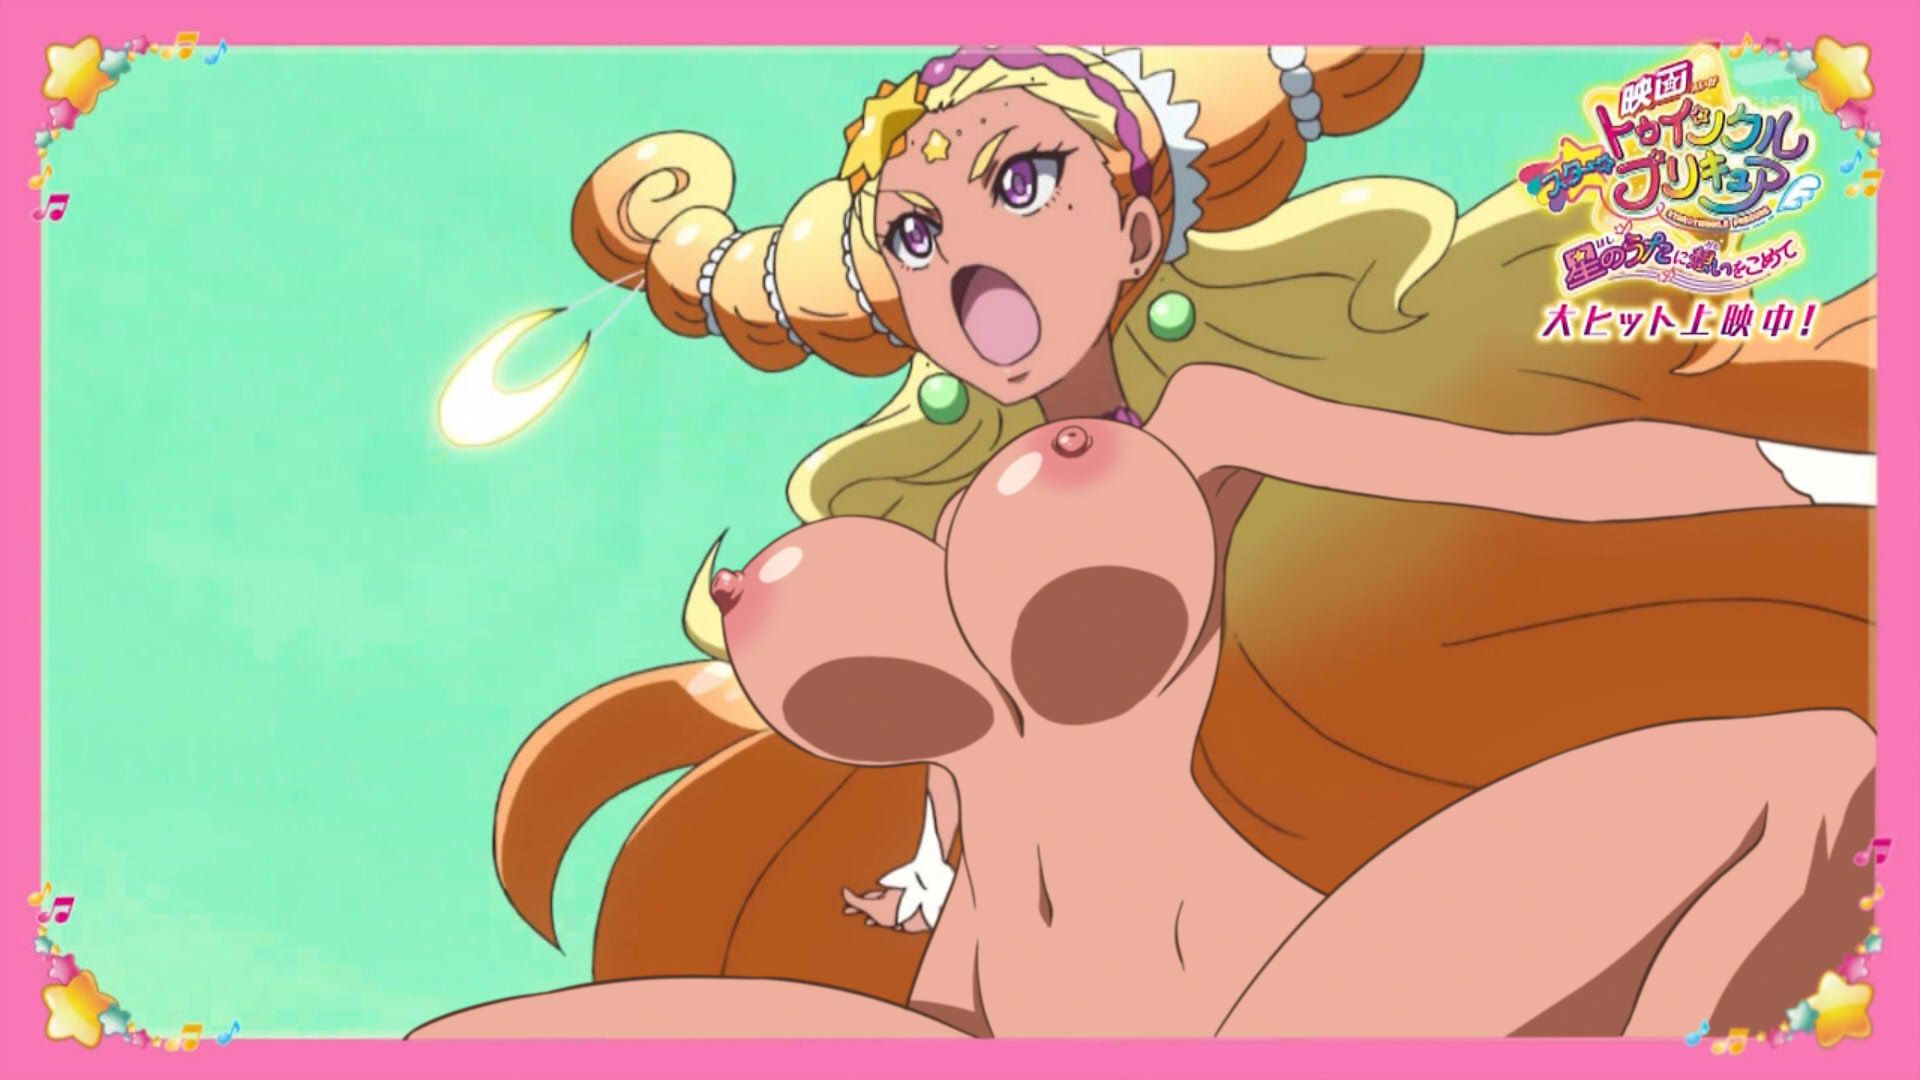 [Star Twinkle Pretty Cure] Stapuri's Image Erotic Image Part 13 9